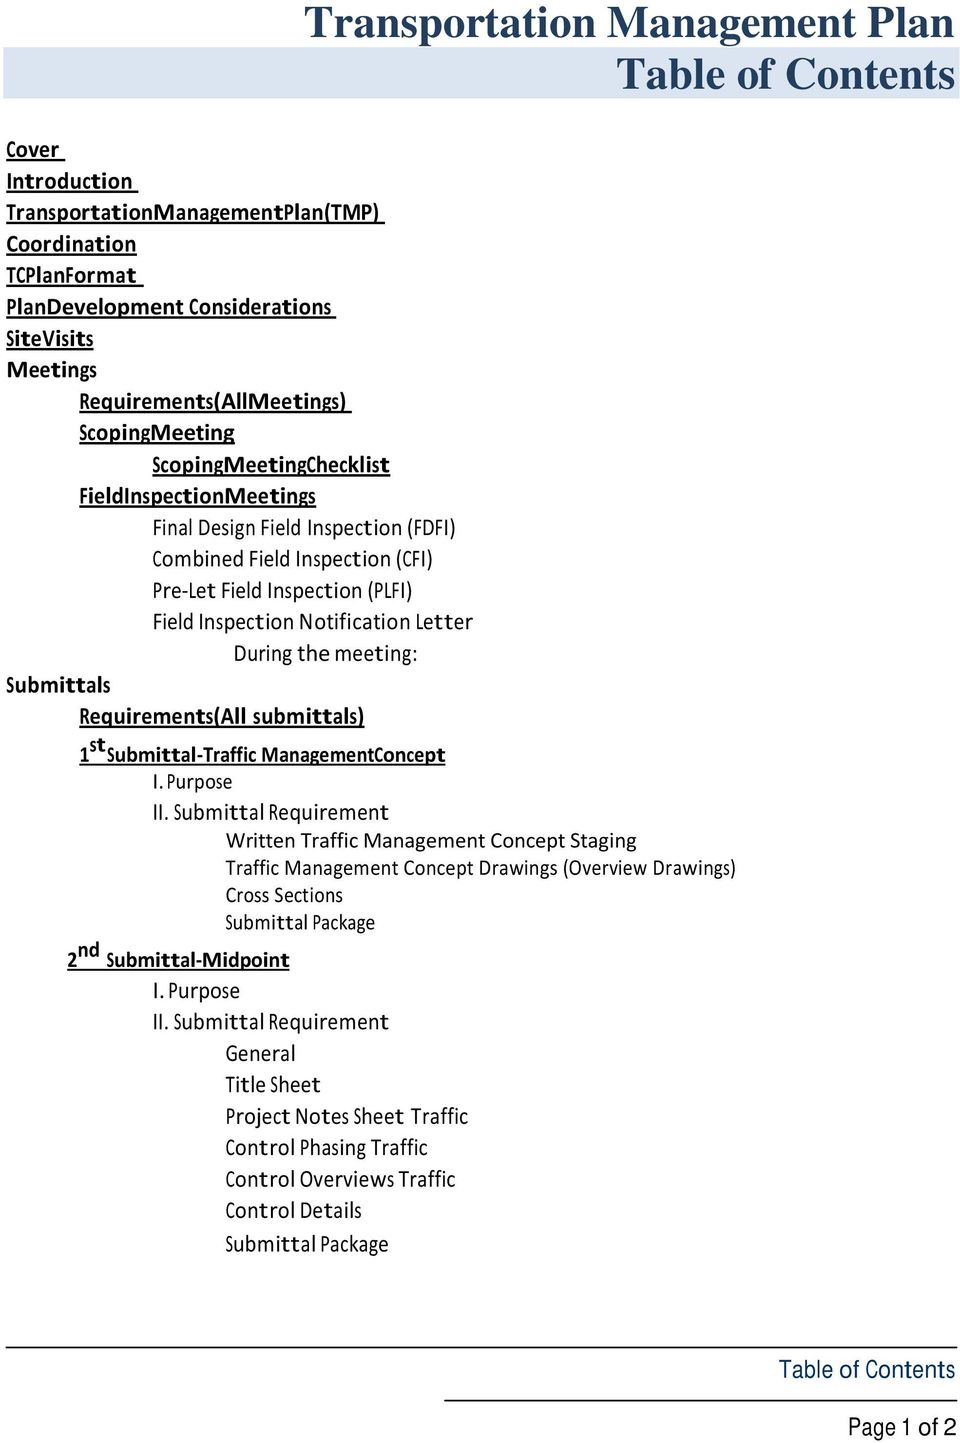 Submittals Requirements (All submittals) Transportation Management Plan Table of Contents 1 st Submittal-Traffic Management Concept I. Purpose II.